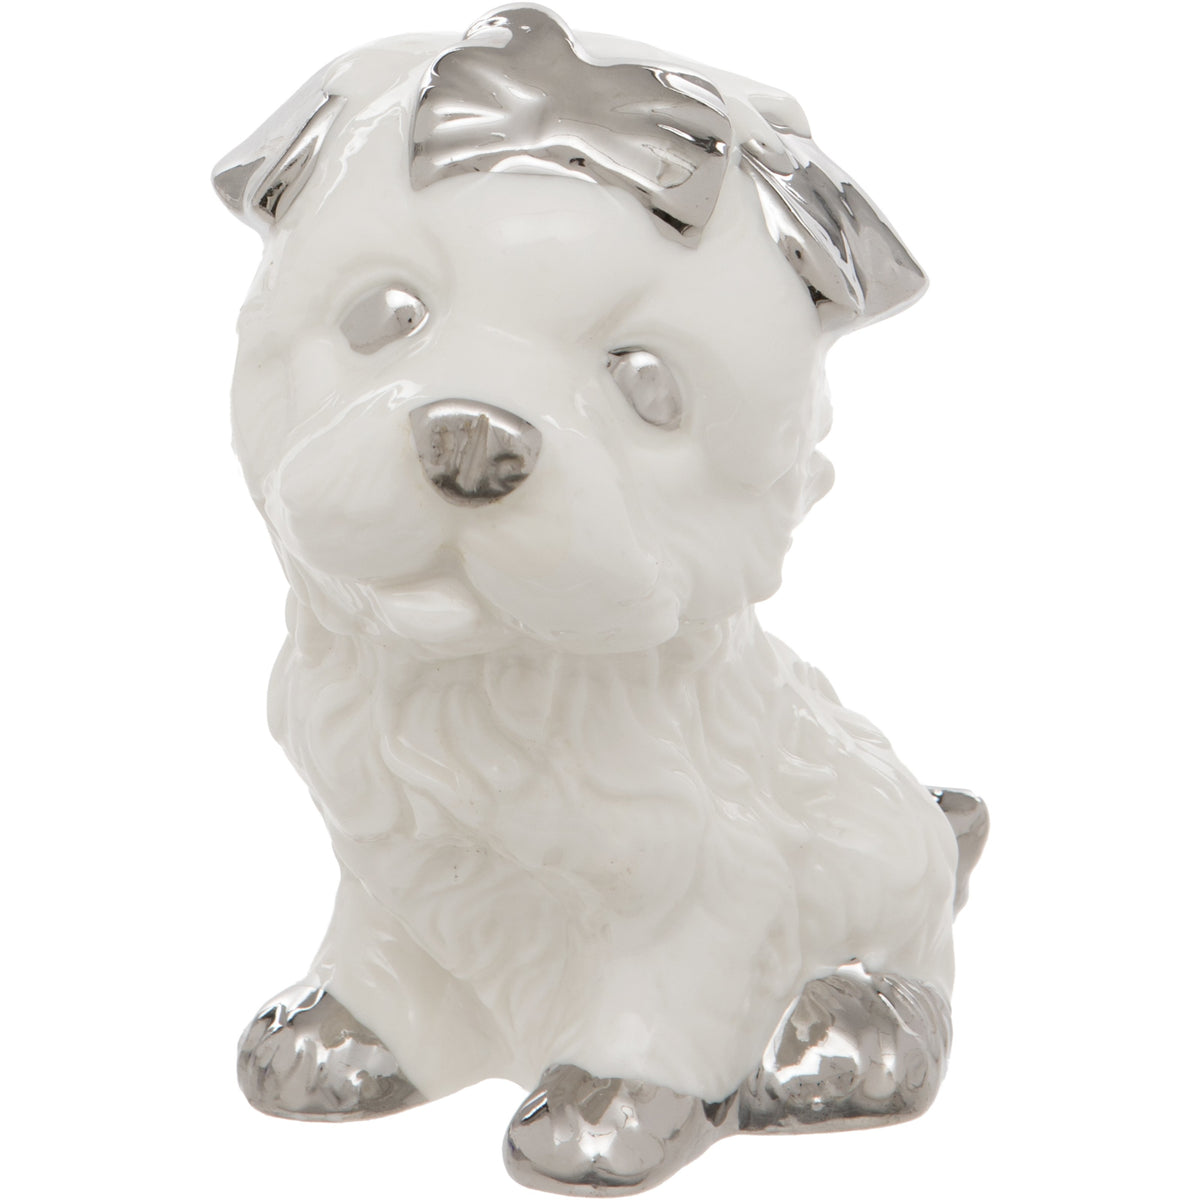 White Ceramic Dog Figurine With Silver Bow